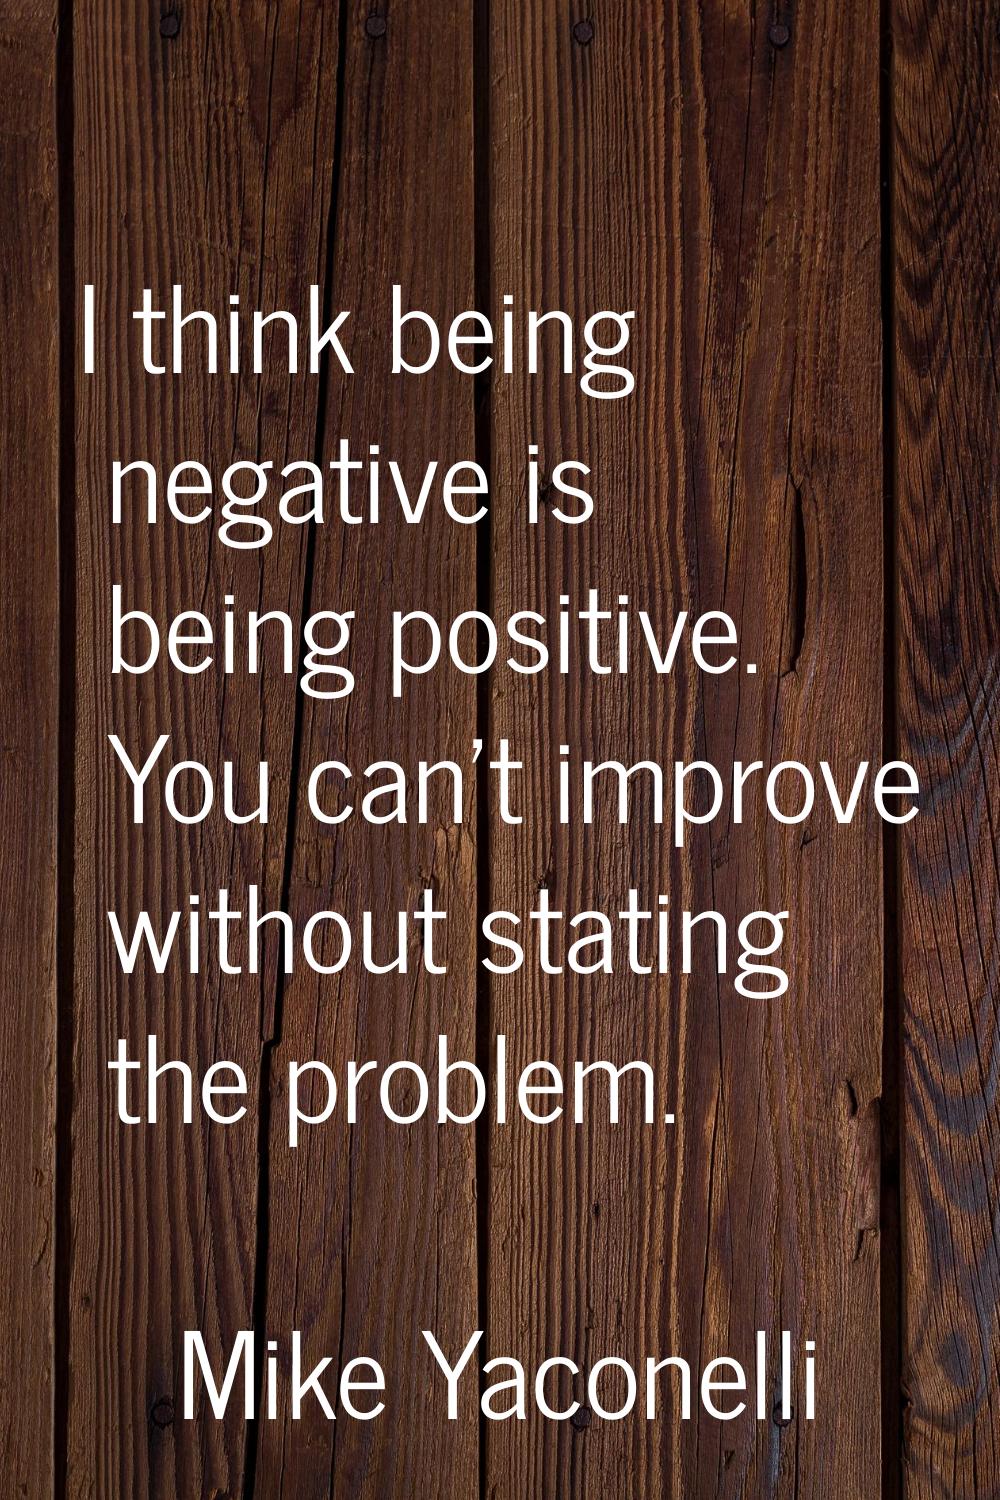 I think being negative is being positive. You can't improve without stating the problem.